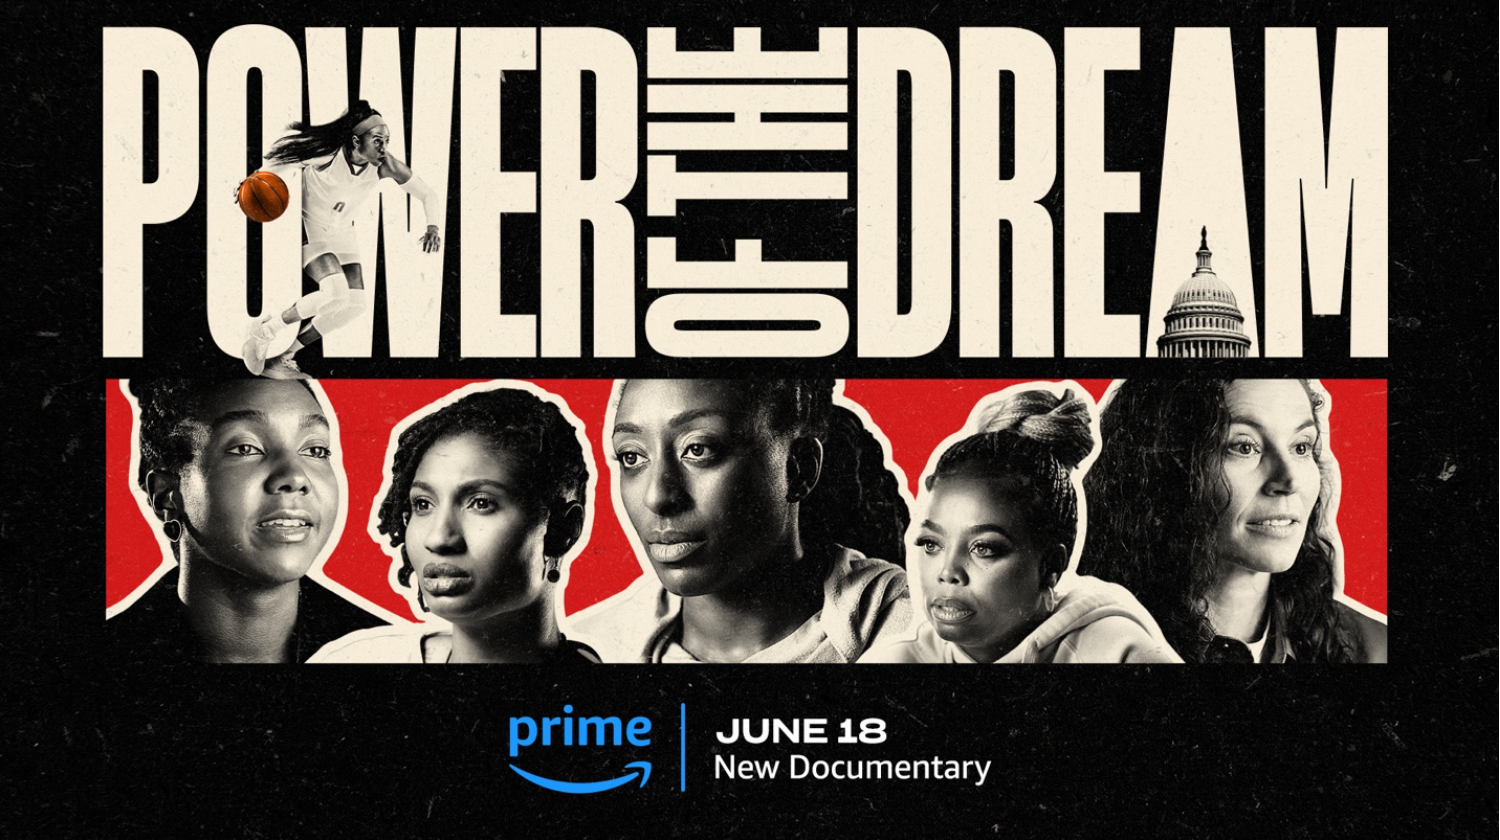 You can watch the WNBA documentary "Power of the Dream" when it debuts on Tuesday, June 18 with a subscription to Prime Video.